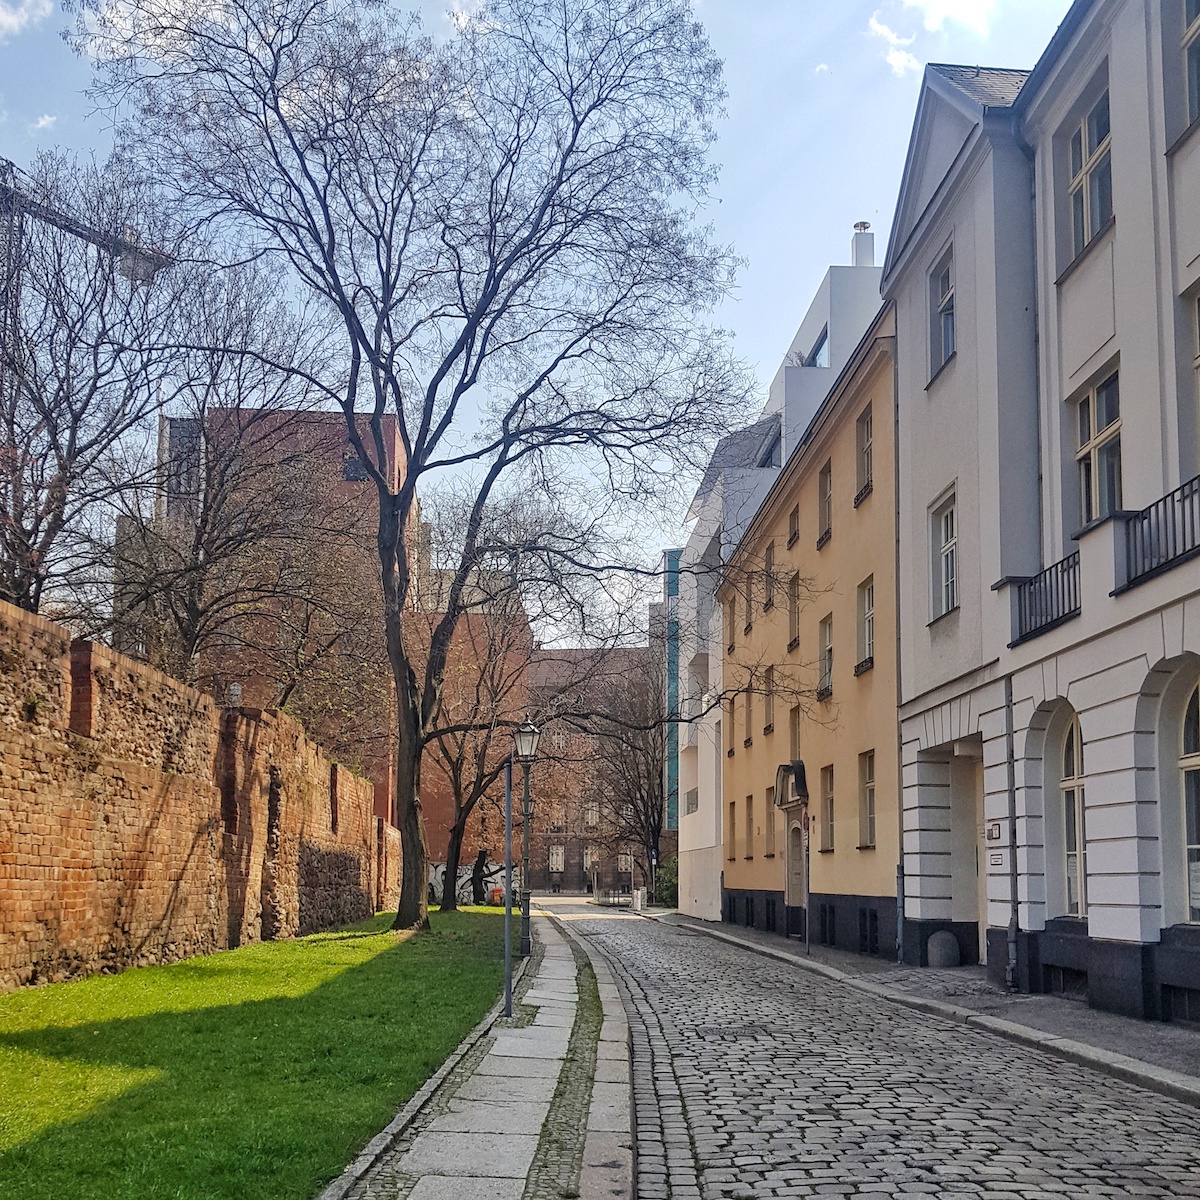 A view of Berlin's original city wall and town houses near it. 